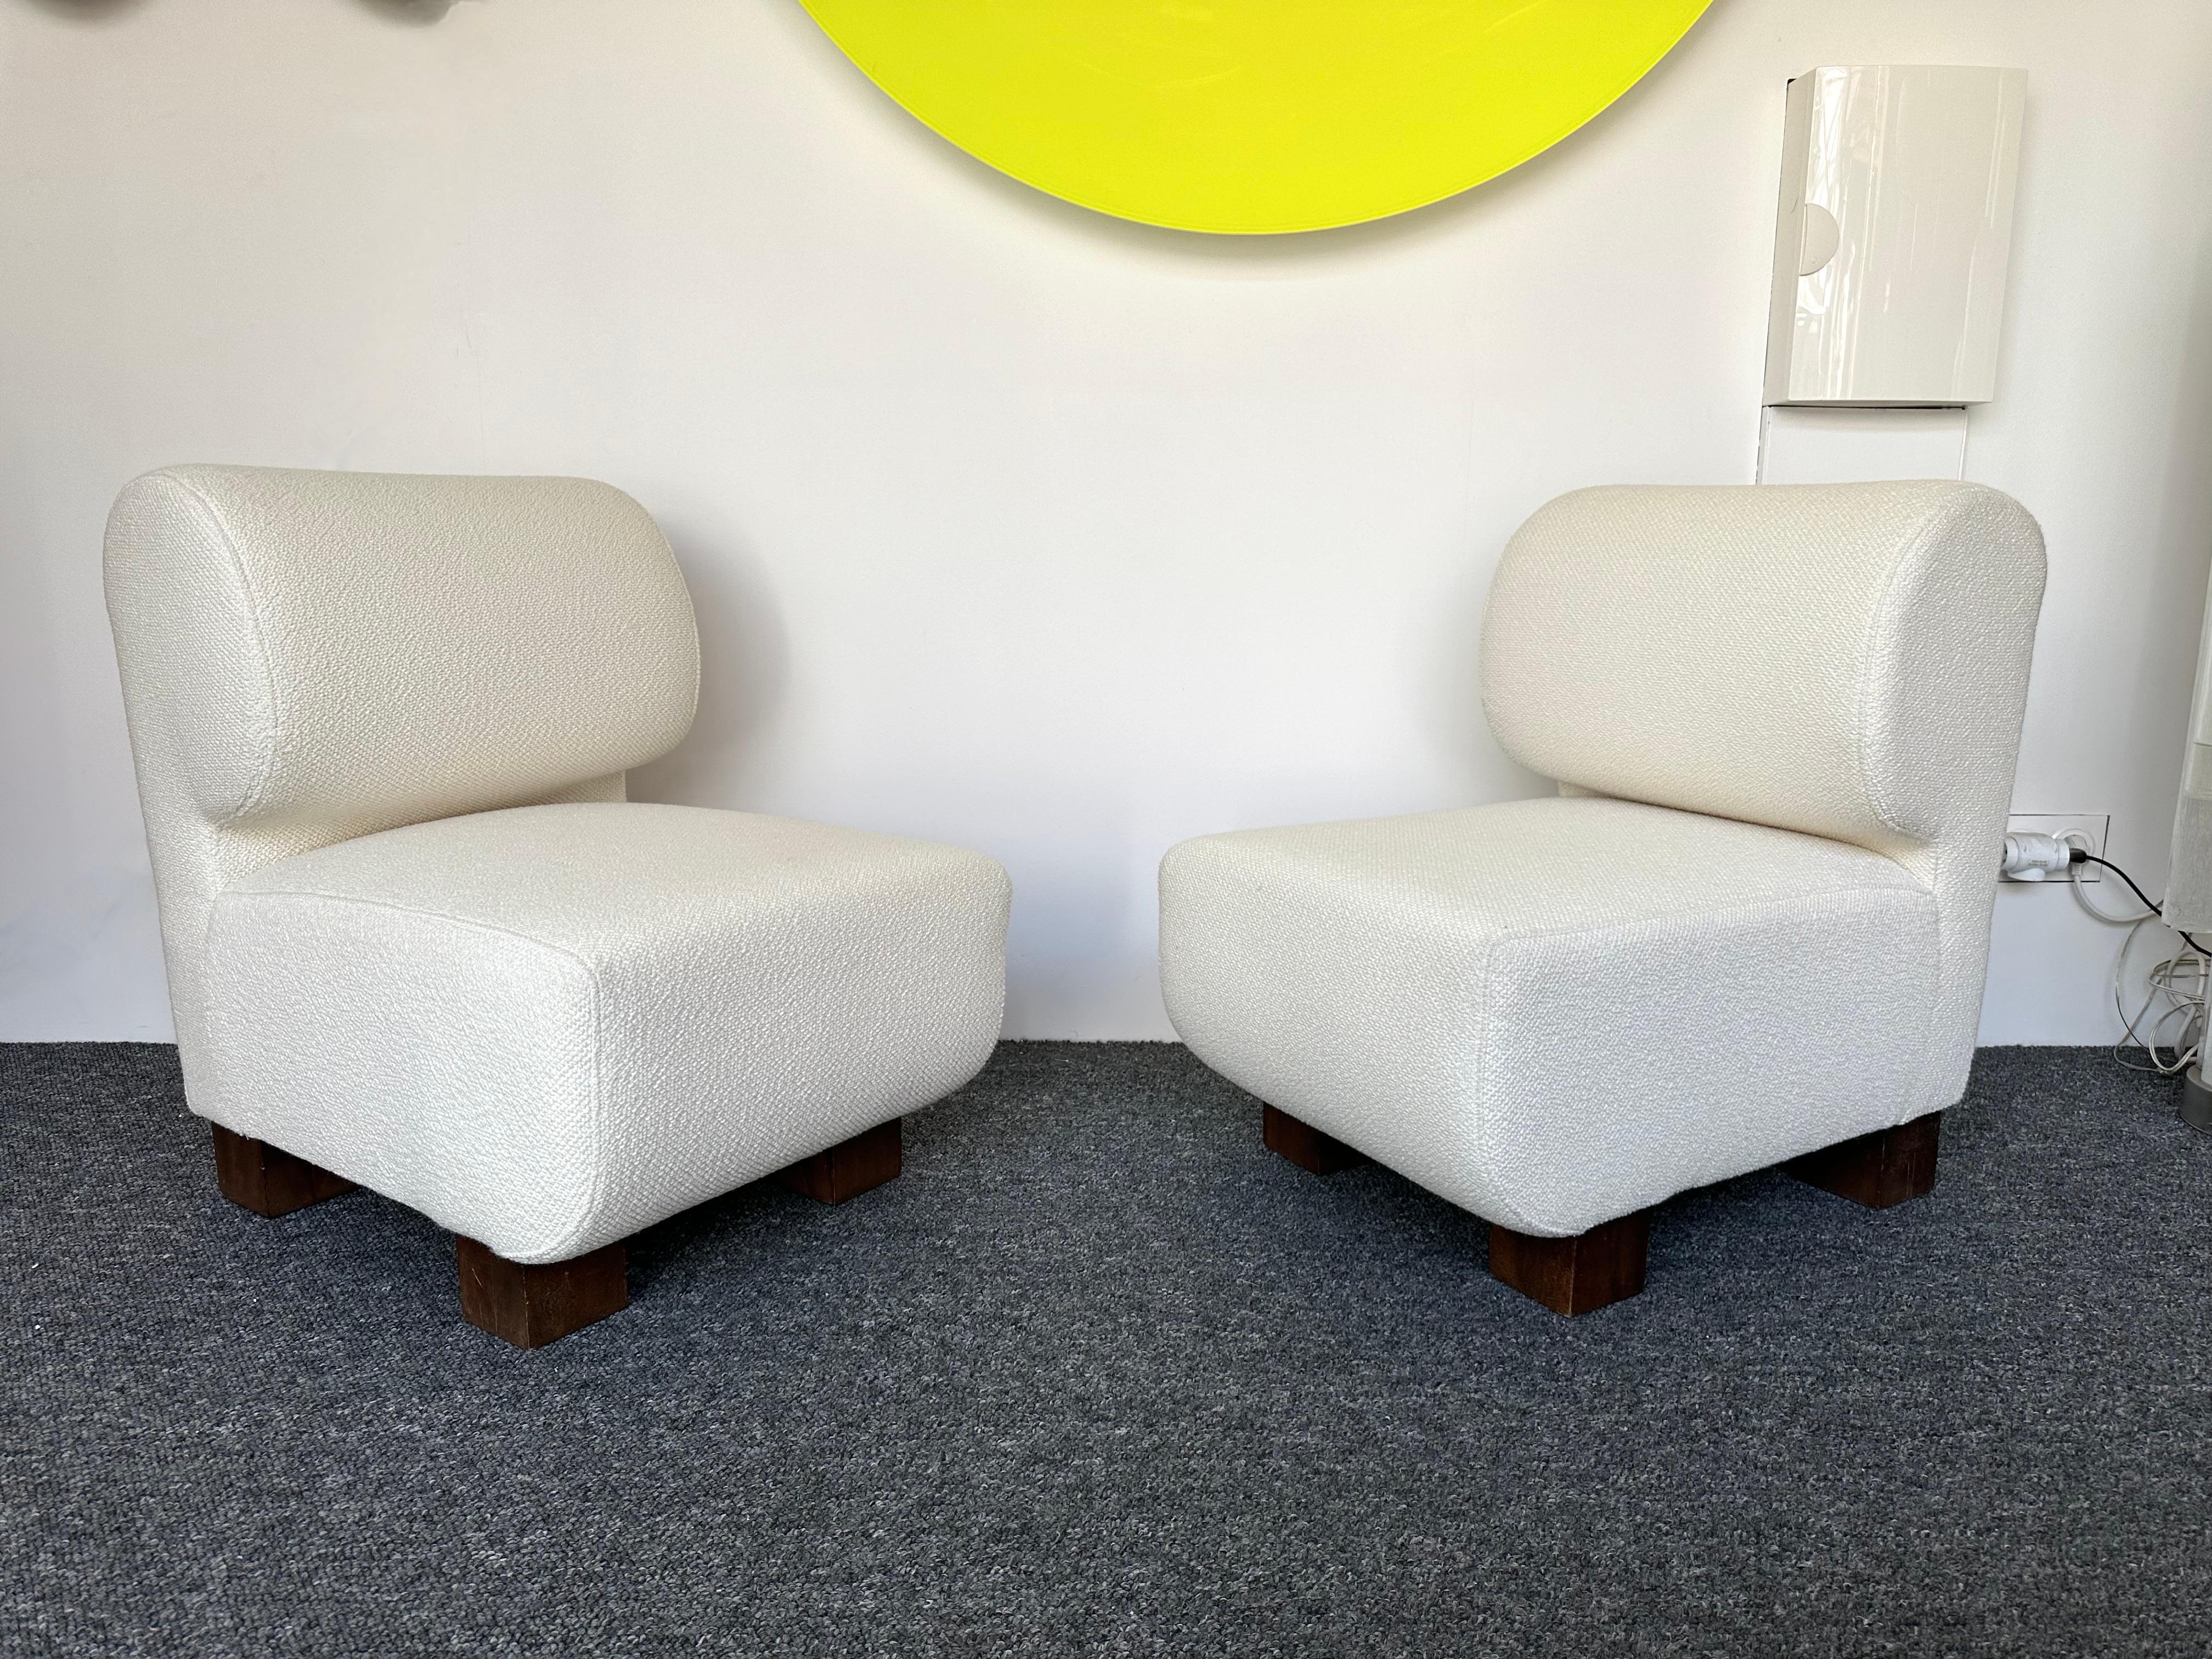 Pair of Slipper Chairs P, Italy, 1970s For Sale 3